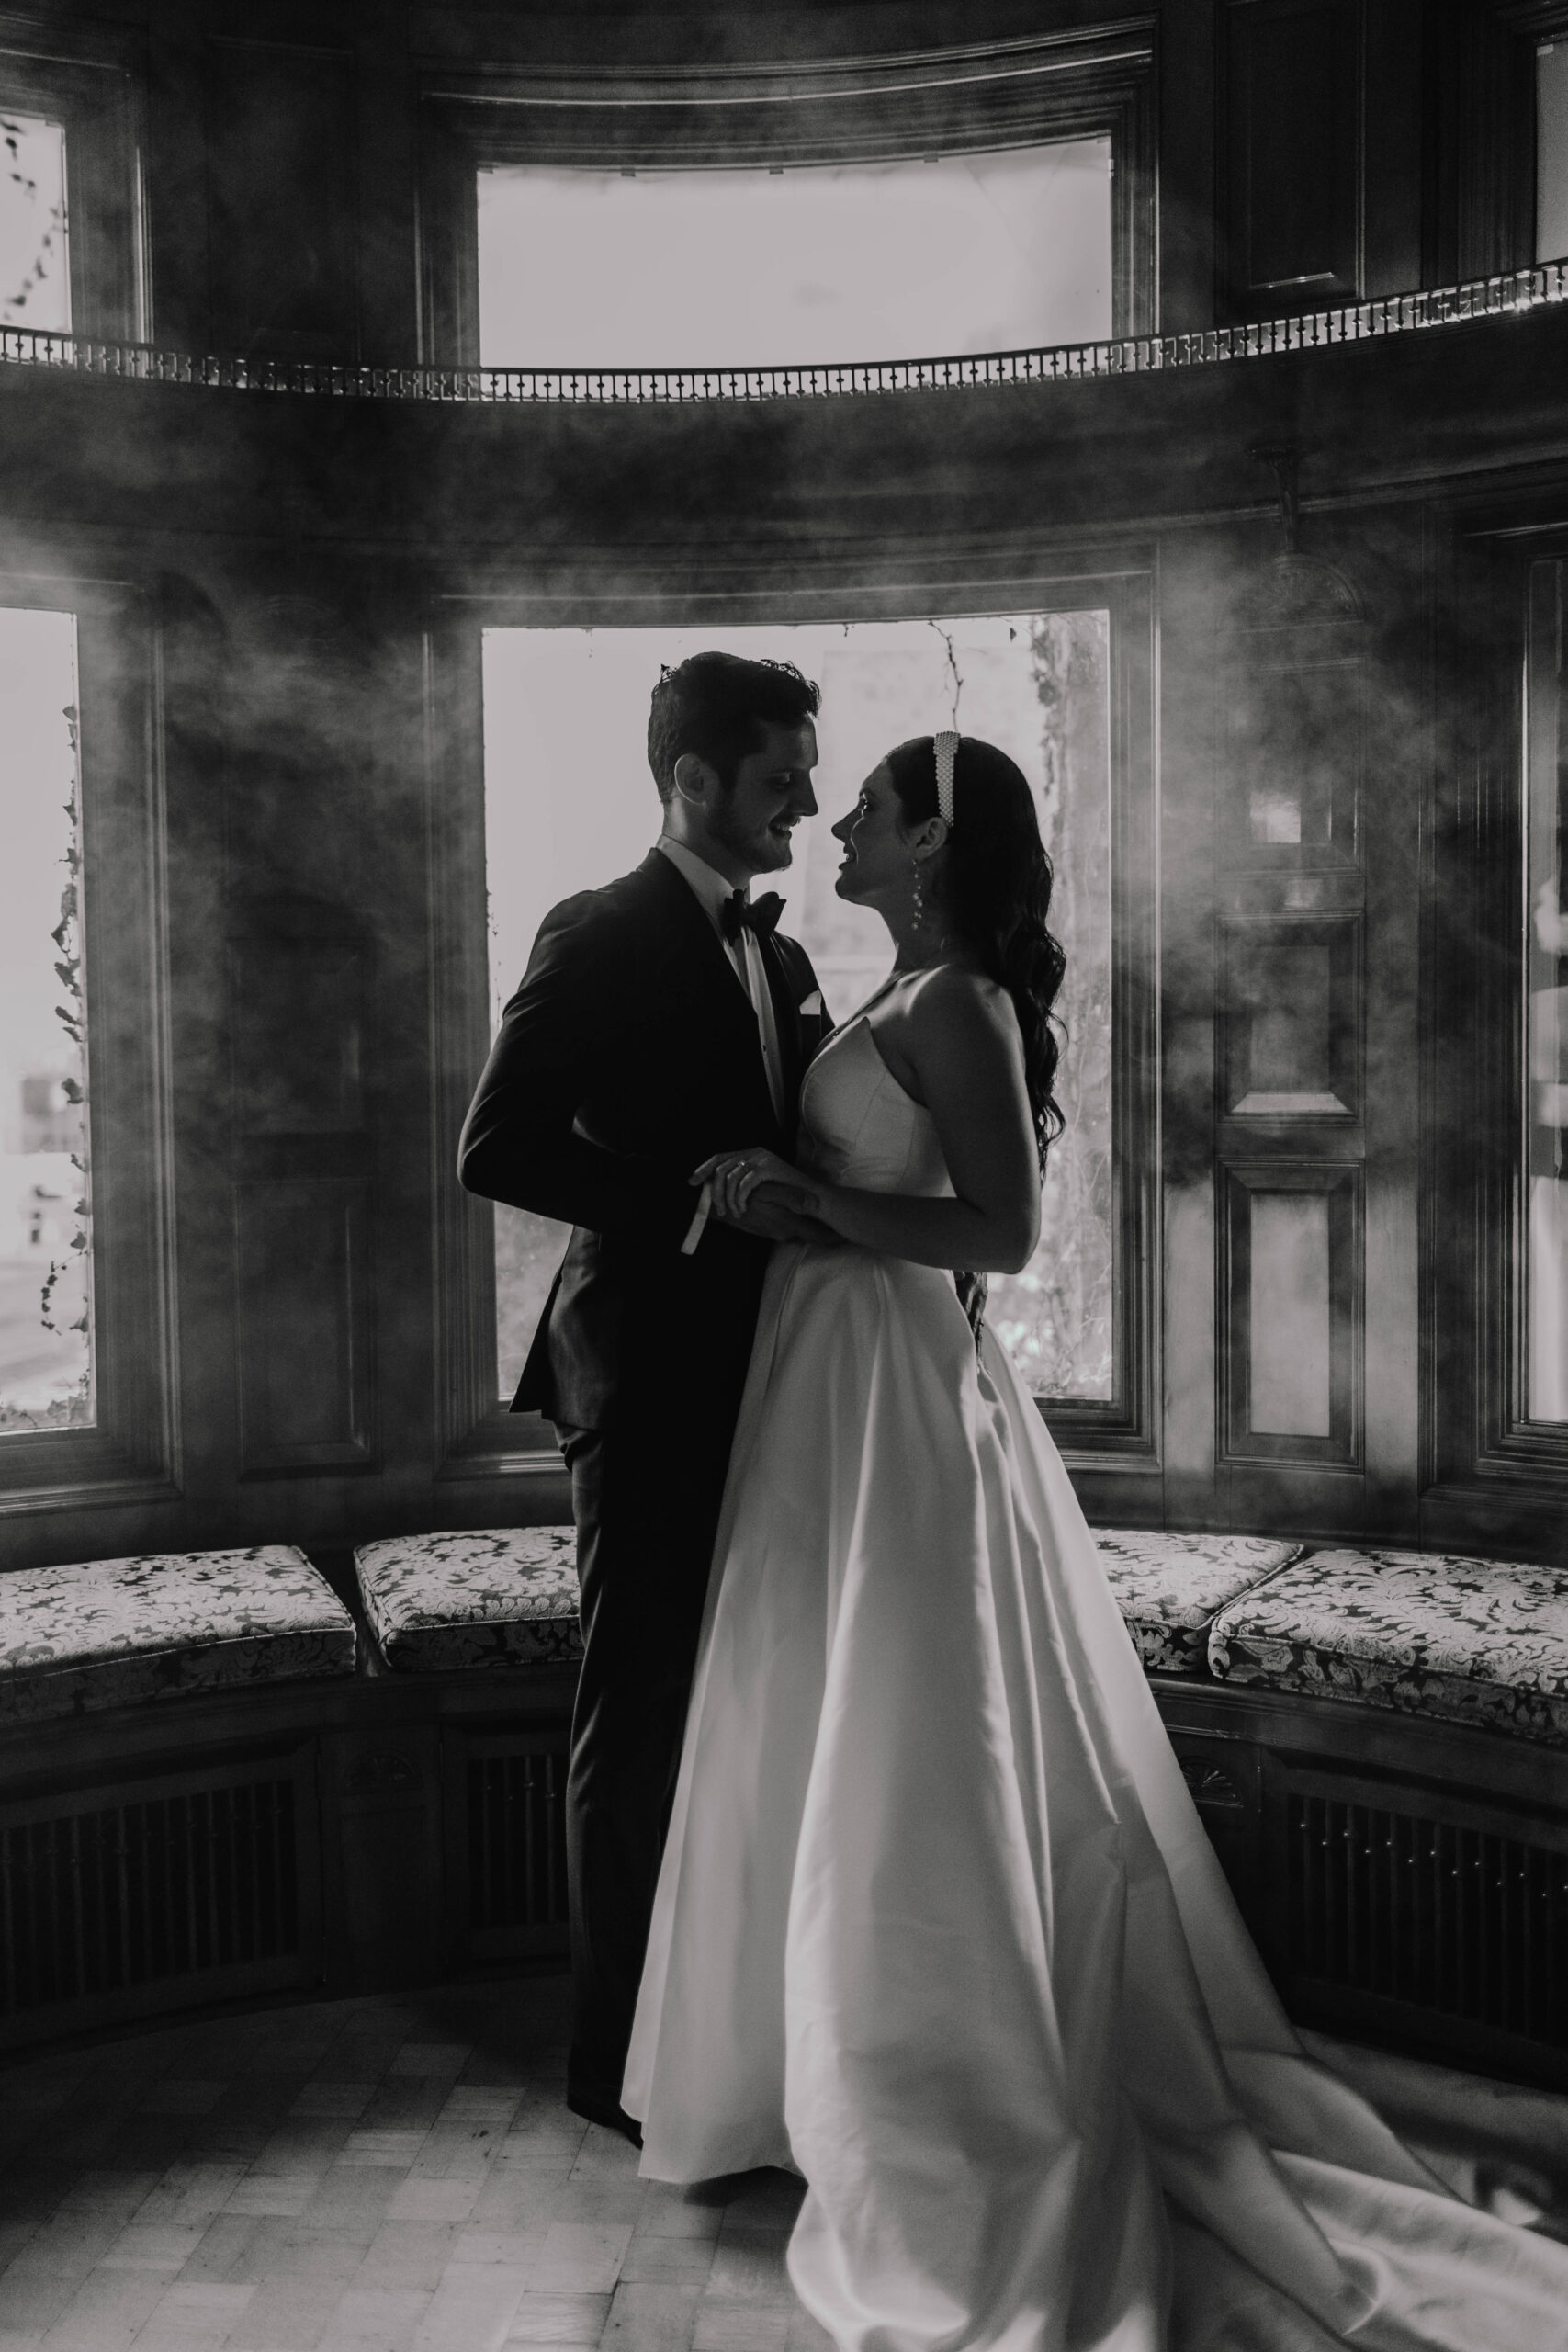 A couple in formal attire stand closely in an elegant wooden library. The woman wears a white gown and the man a black suit. They gaze at each other and appear to be in a romantic moment at the van dusen mansion